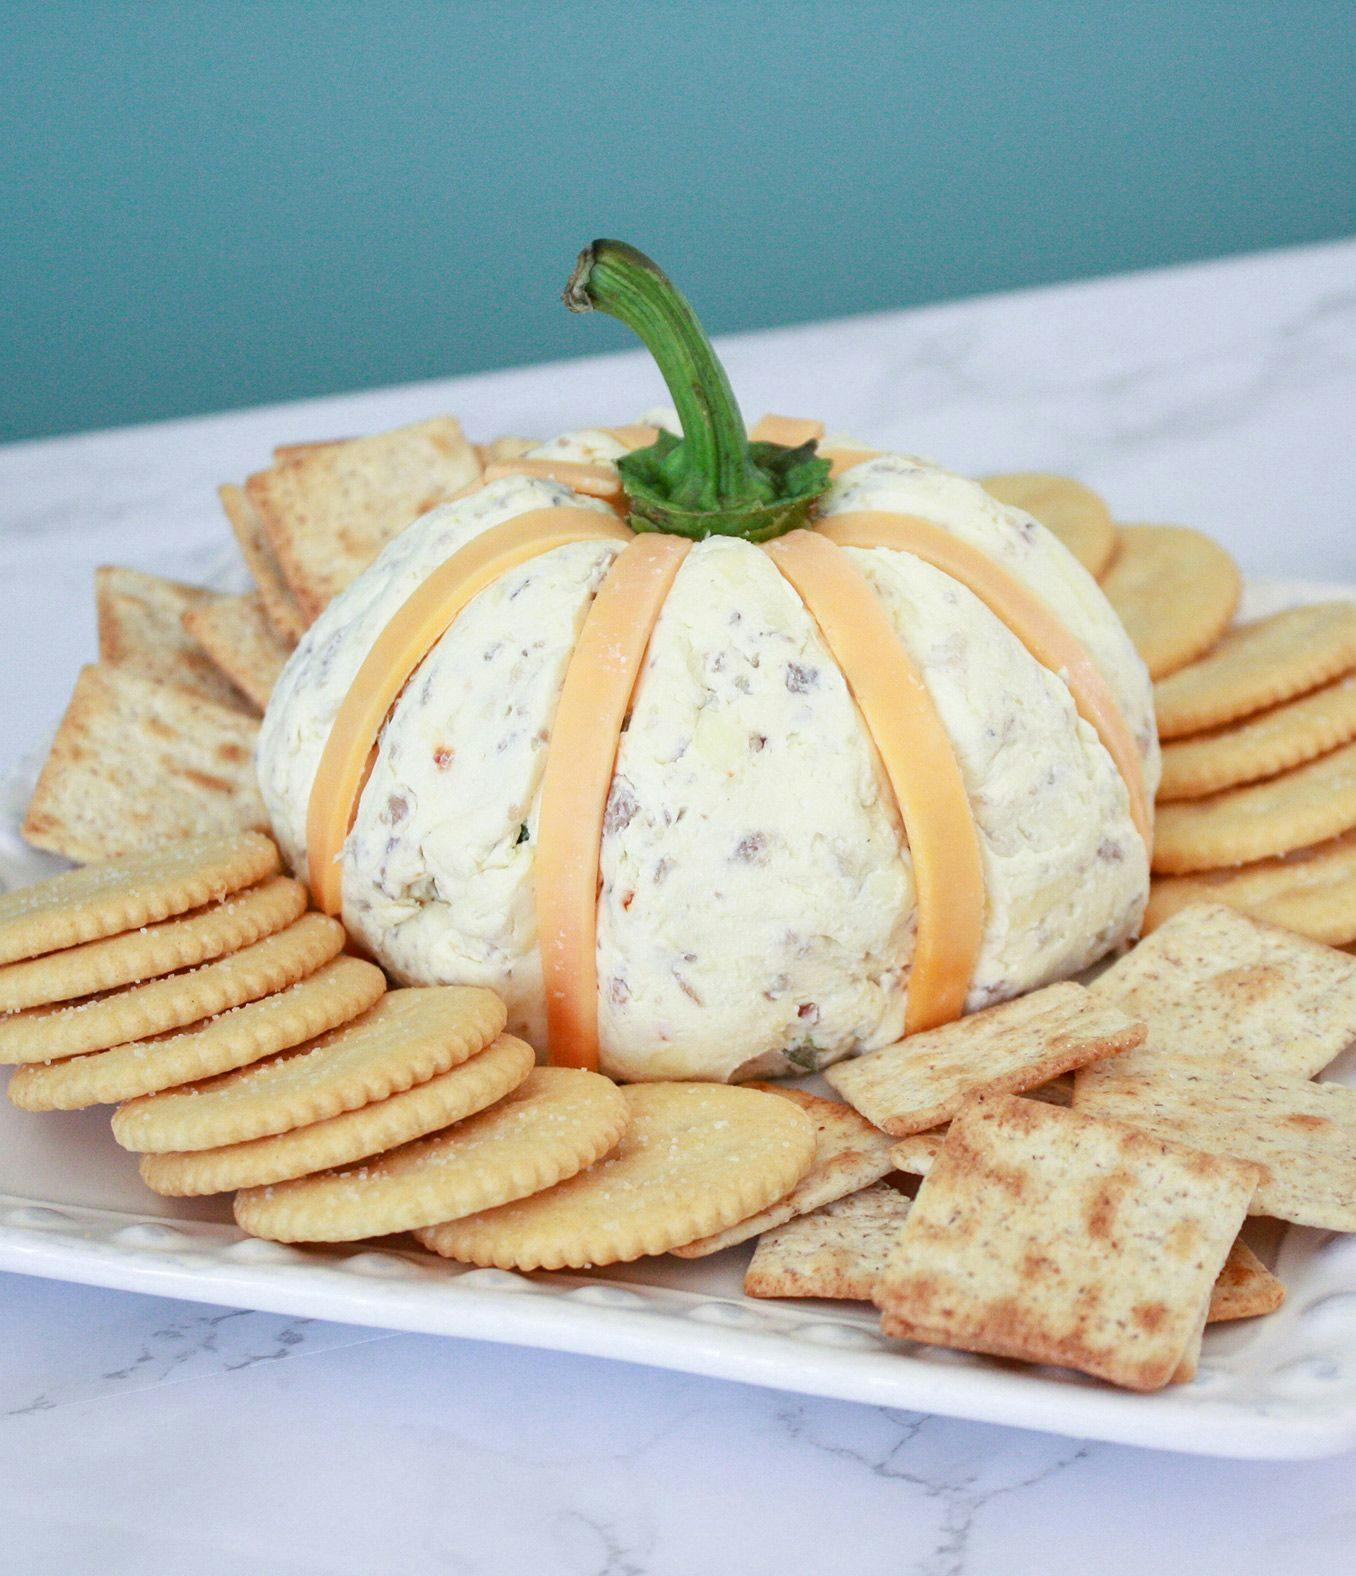 Bacon Jalapeno Cheddar Cheese ball shaped like a pumpkin surrounded by crackers. 